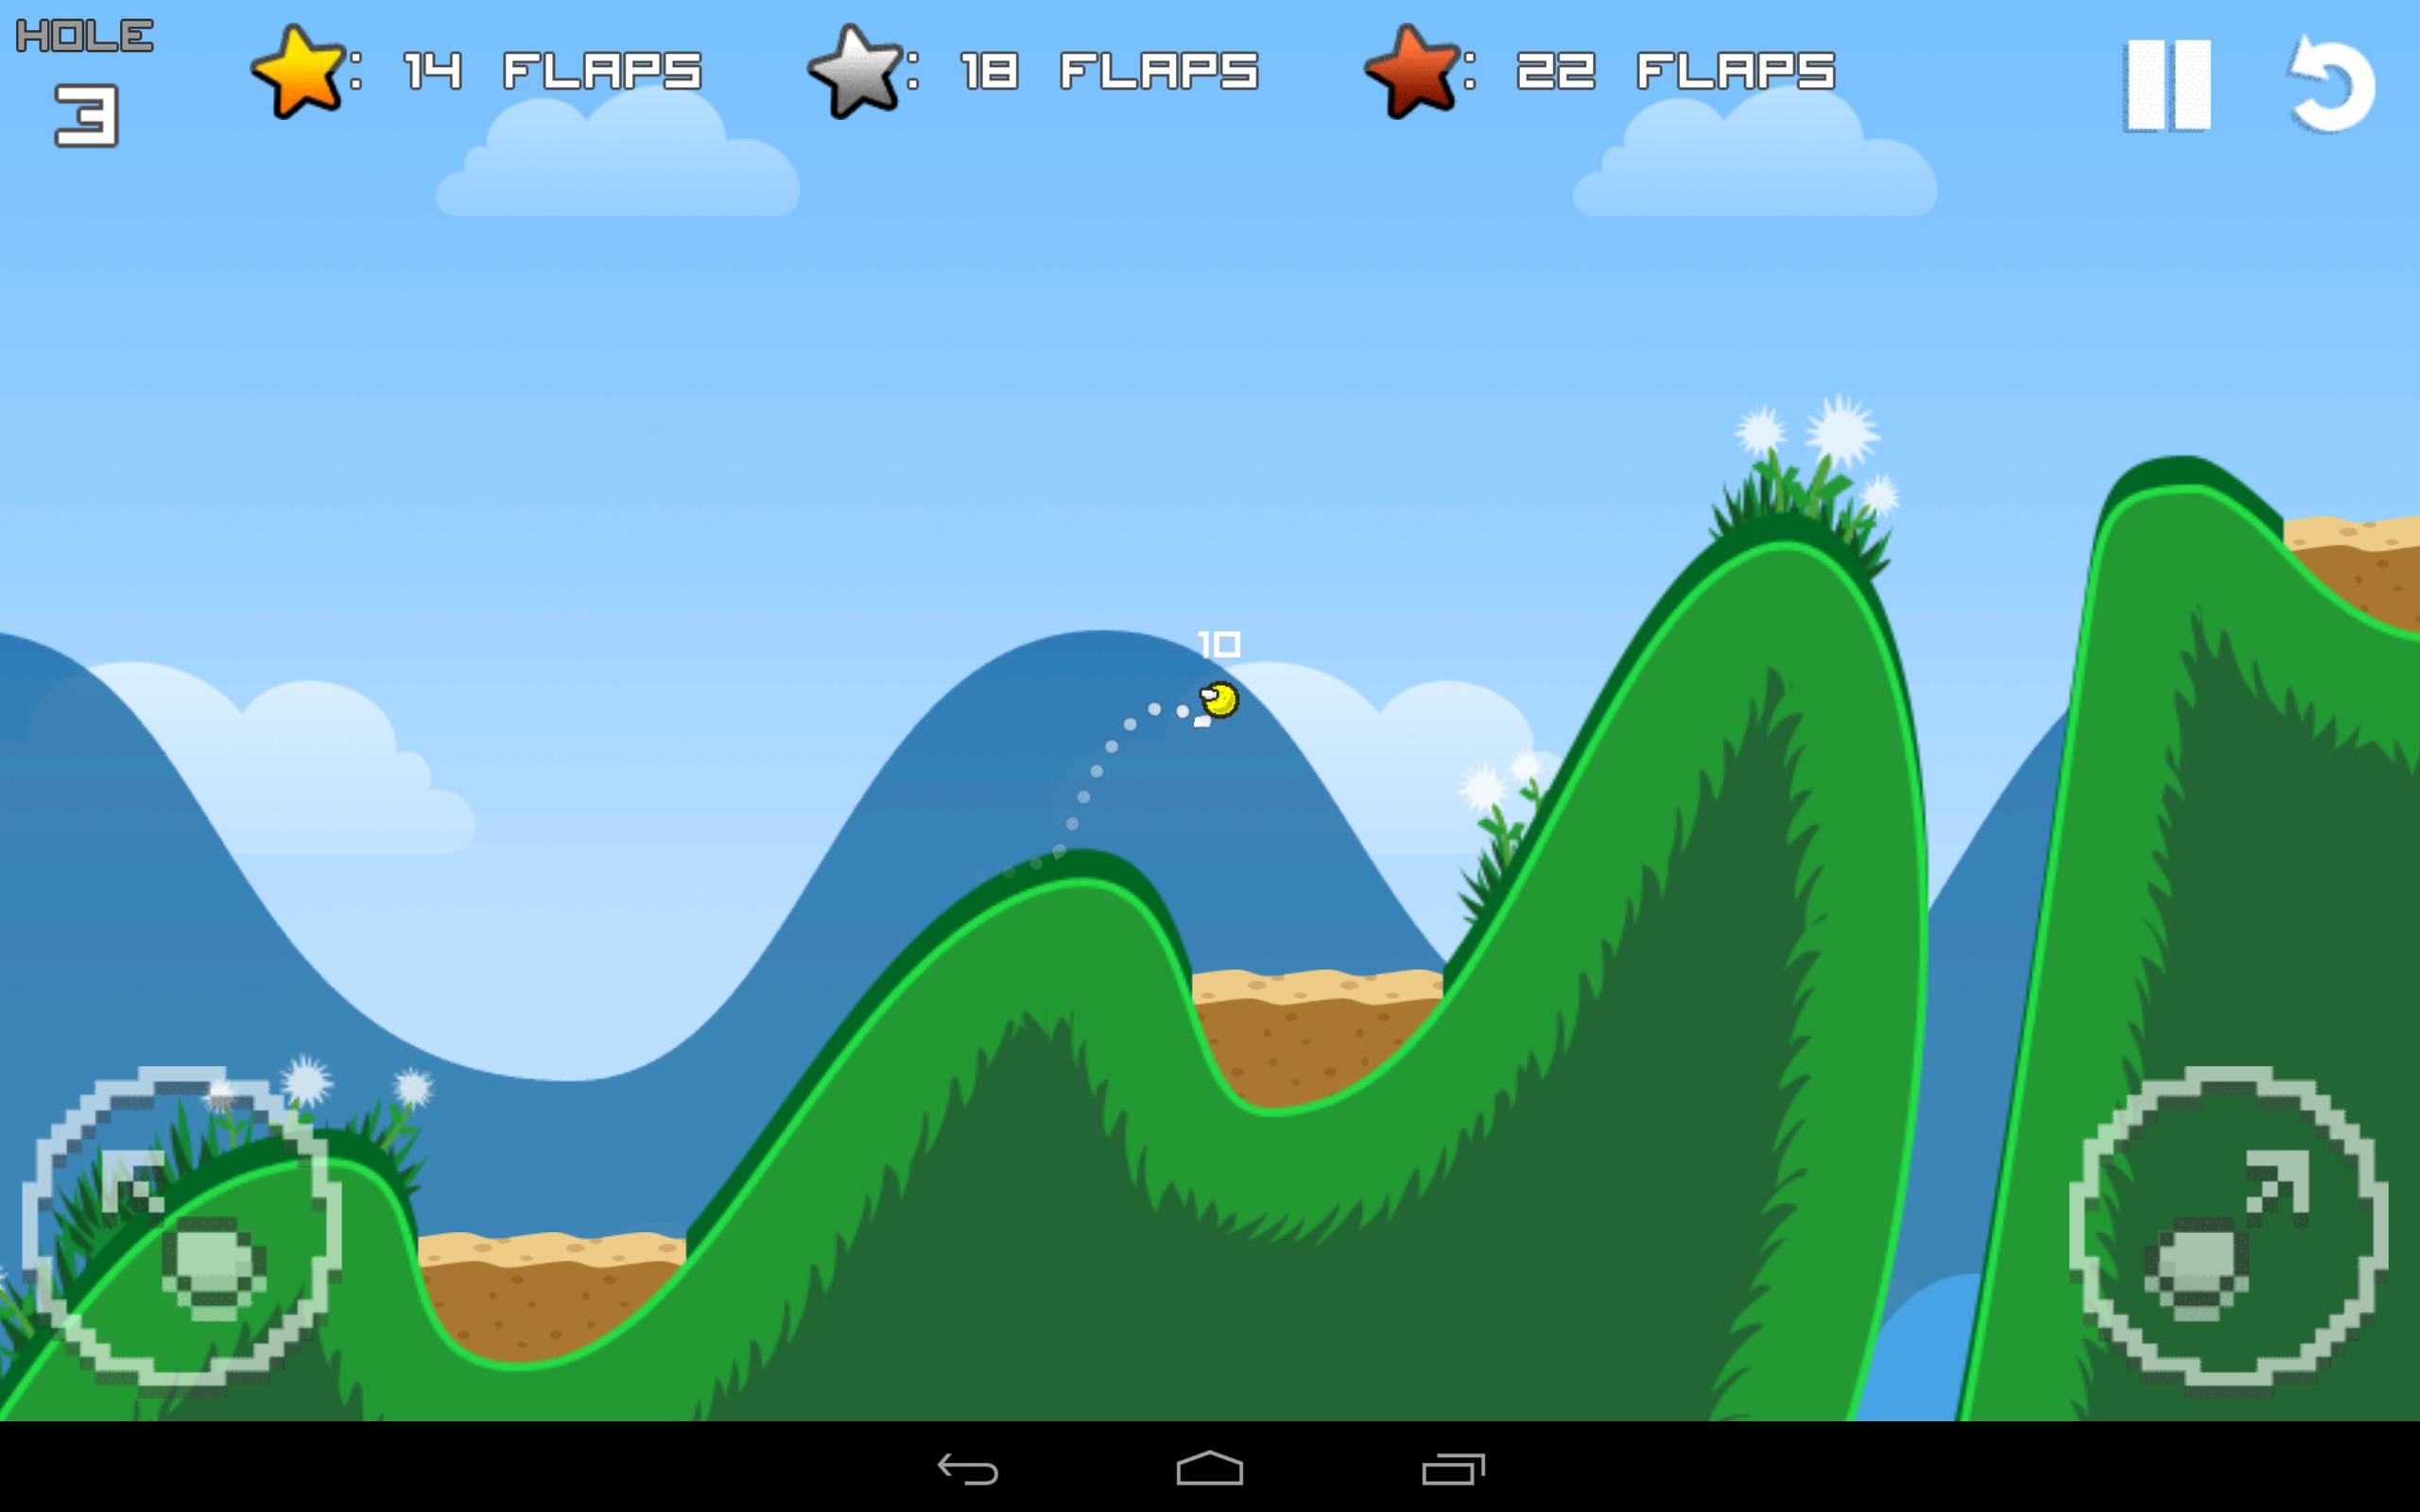 Flappy Golf for Android - APK Download